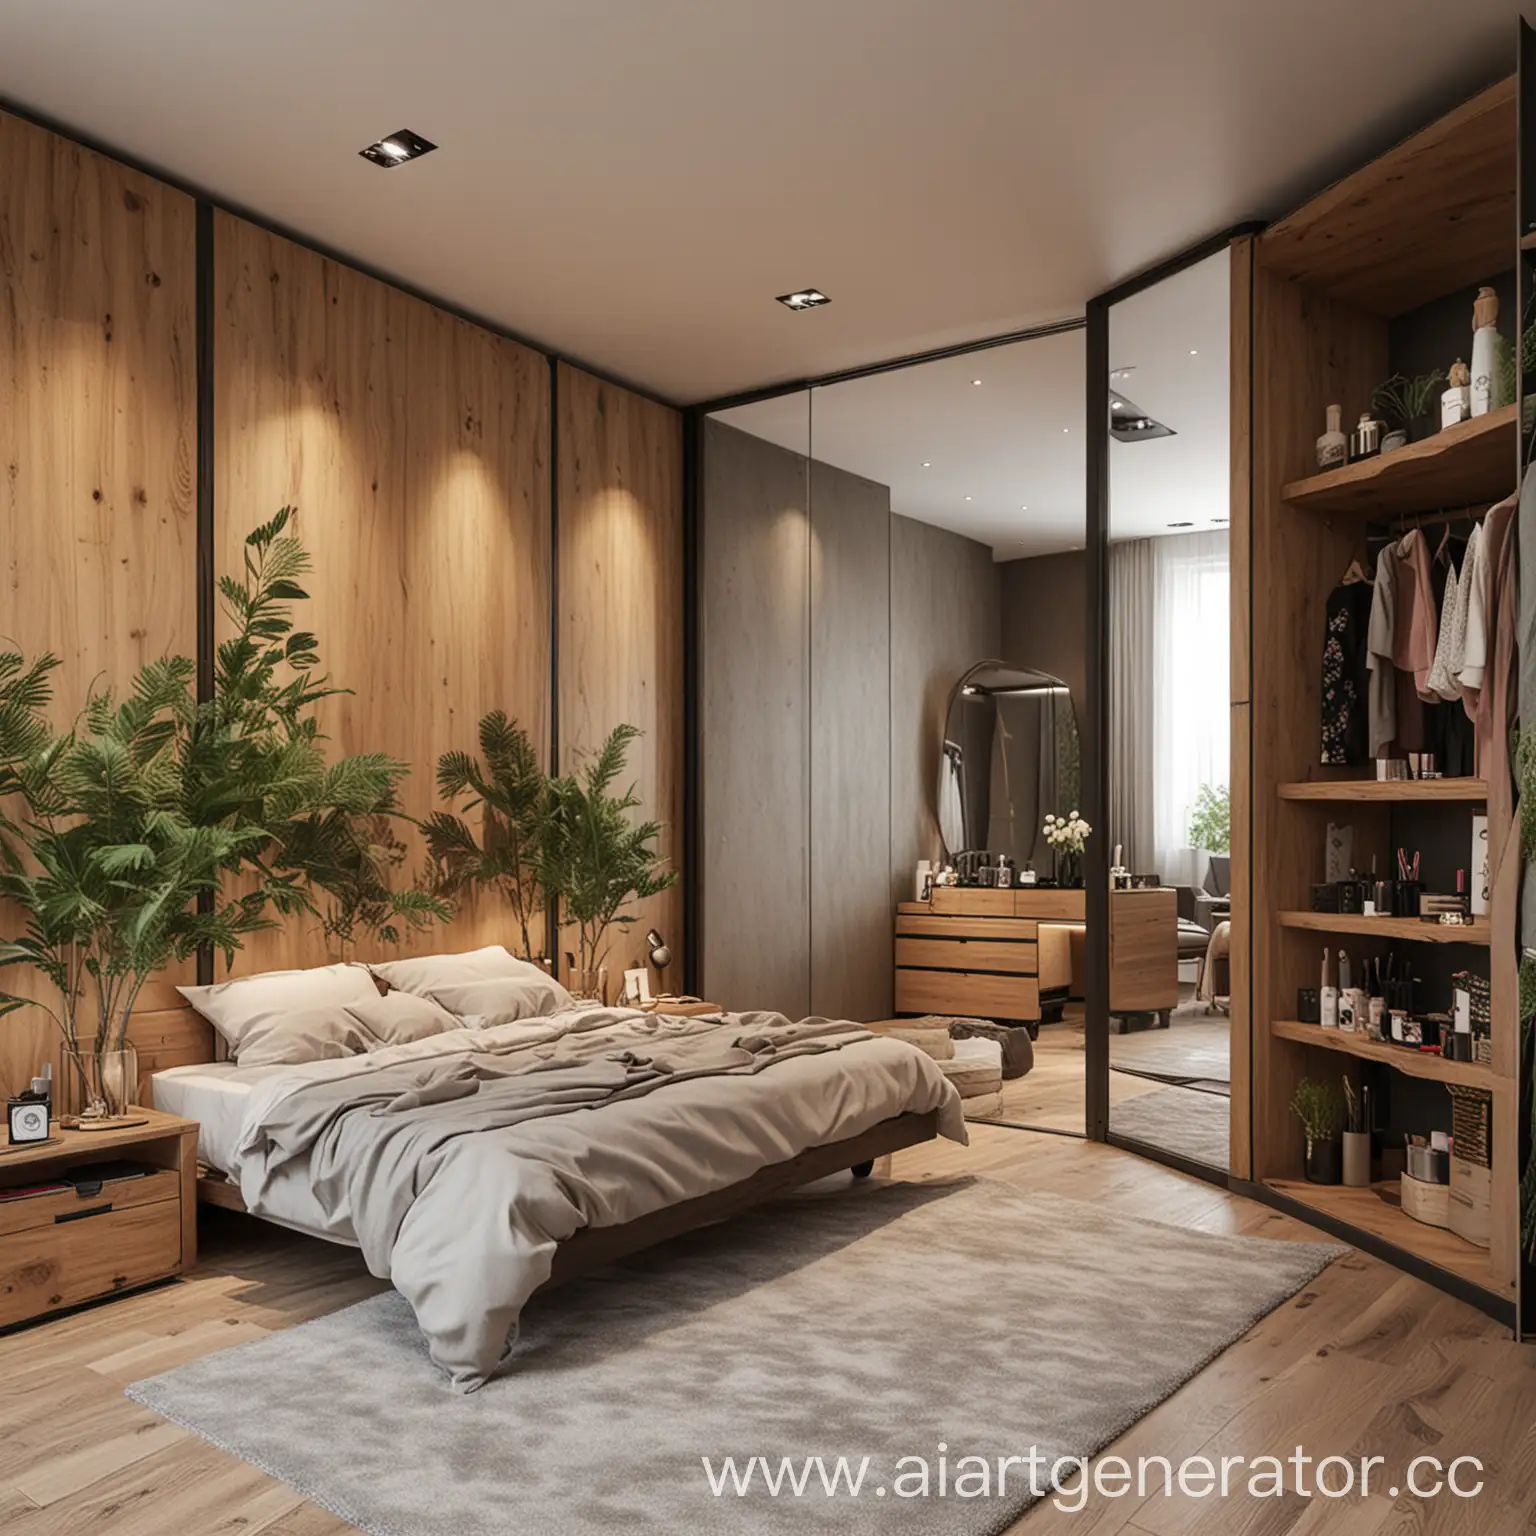 Modern-Bedroom-with-Spacious-Wardrobe-and-Natureinspired-Makeup-Area